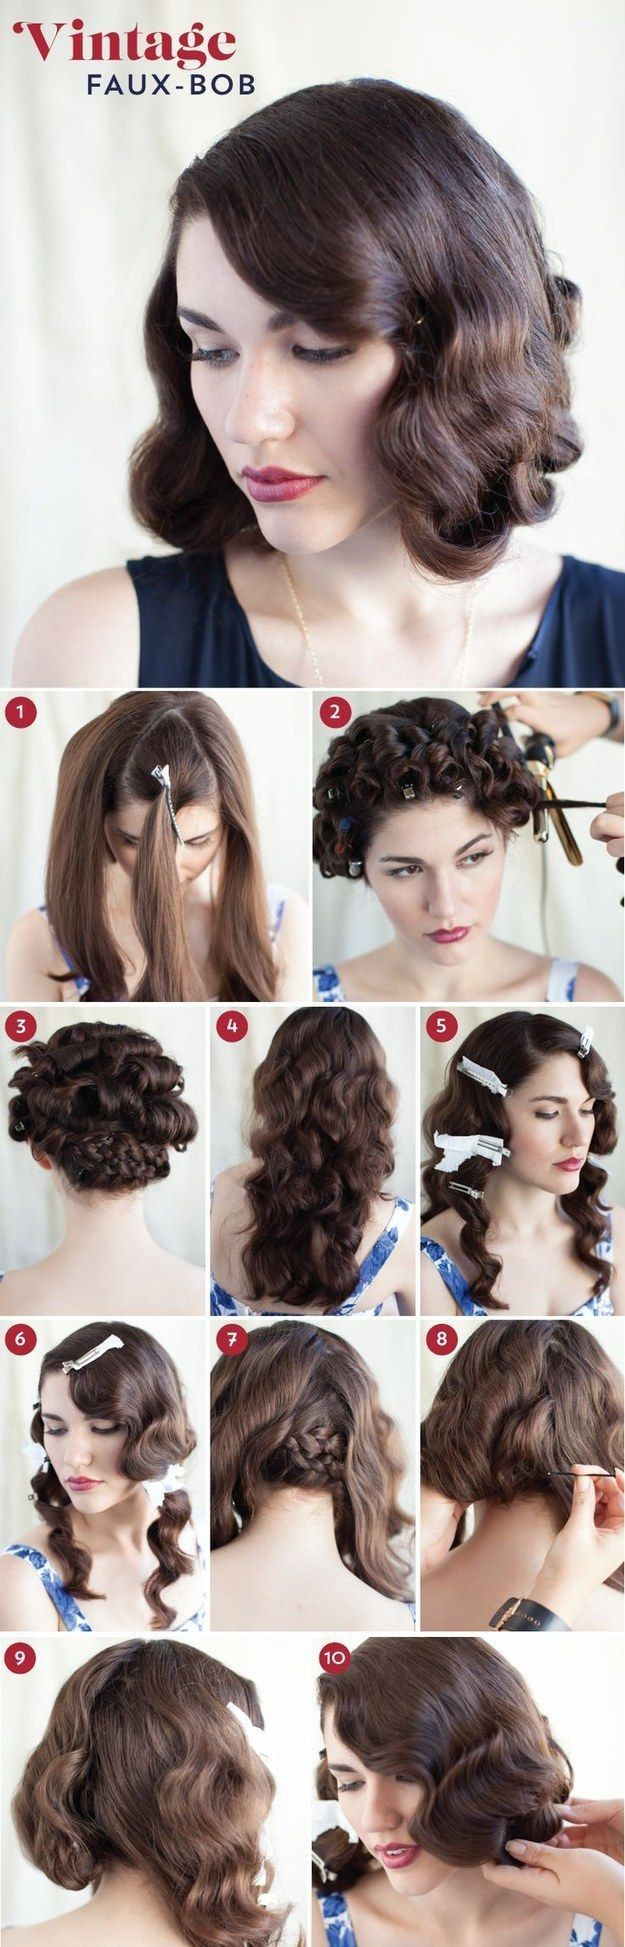 How To Do A 1920S Hairstyle For Long Hair
 A 1920s Faux Bob Hair